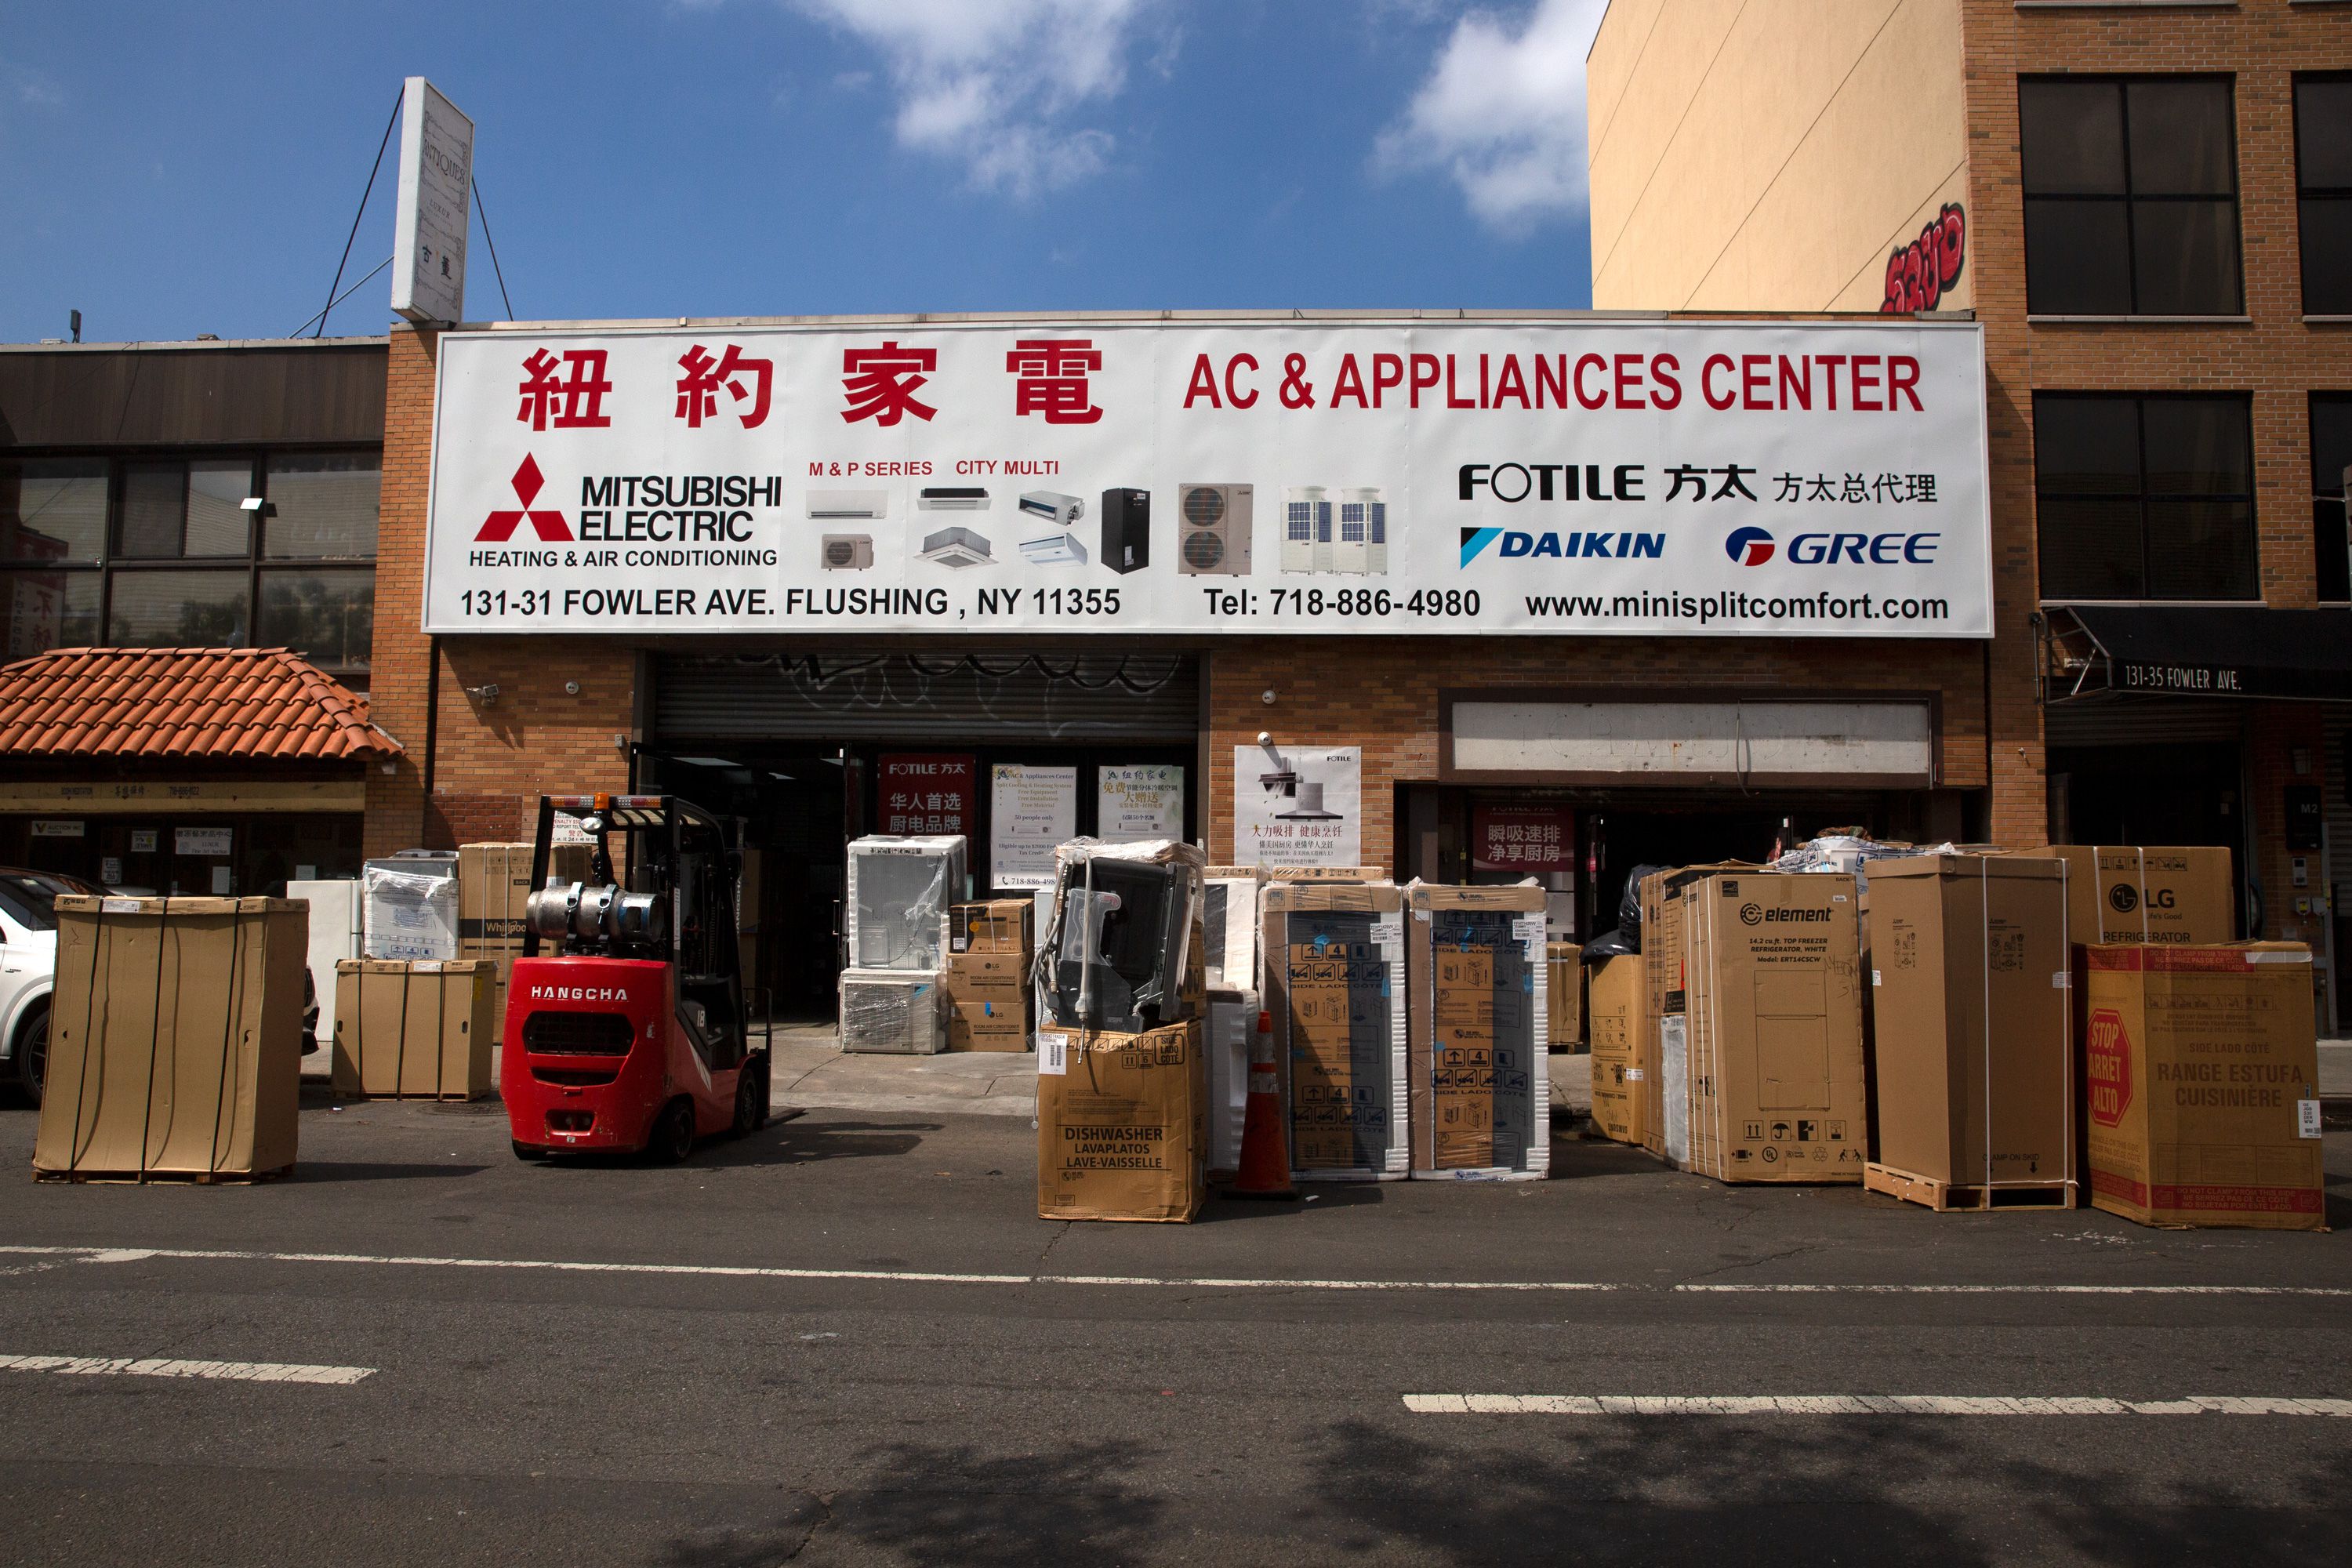 Large boxes of electronics sit in front of AC & Appliances Center in Flushing.